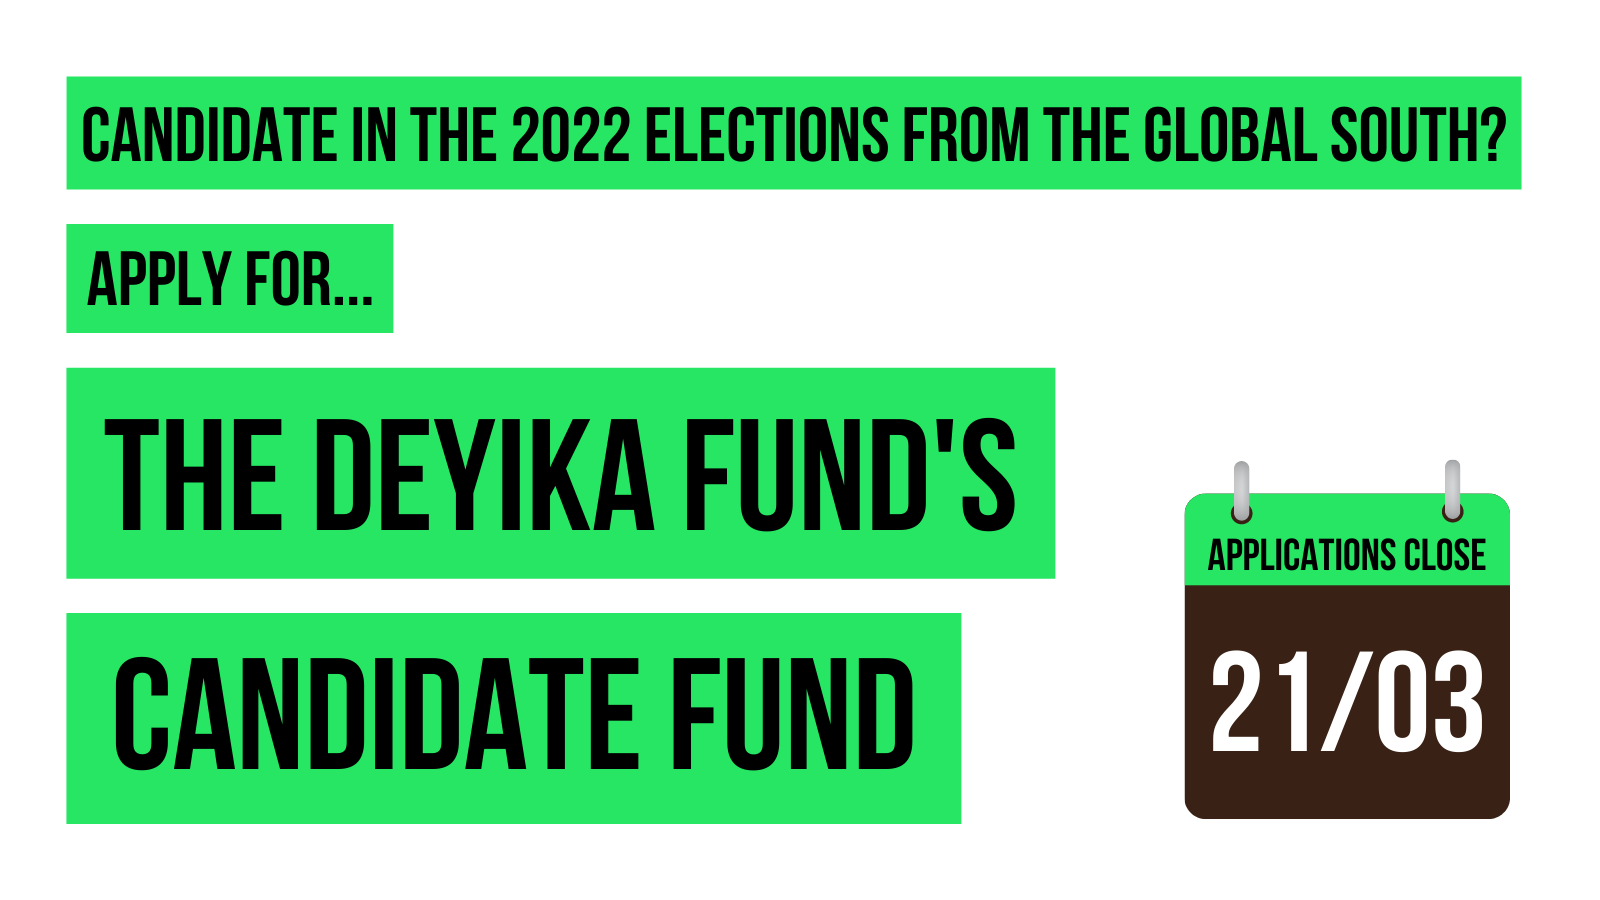 Graphic with text reading: candidate in the 2022 elections from the global south? Apply for the Deyika Fund's Candidate Fund. Calendar icon with text reading applications close 21/03